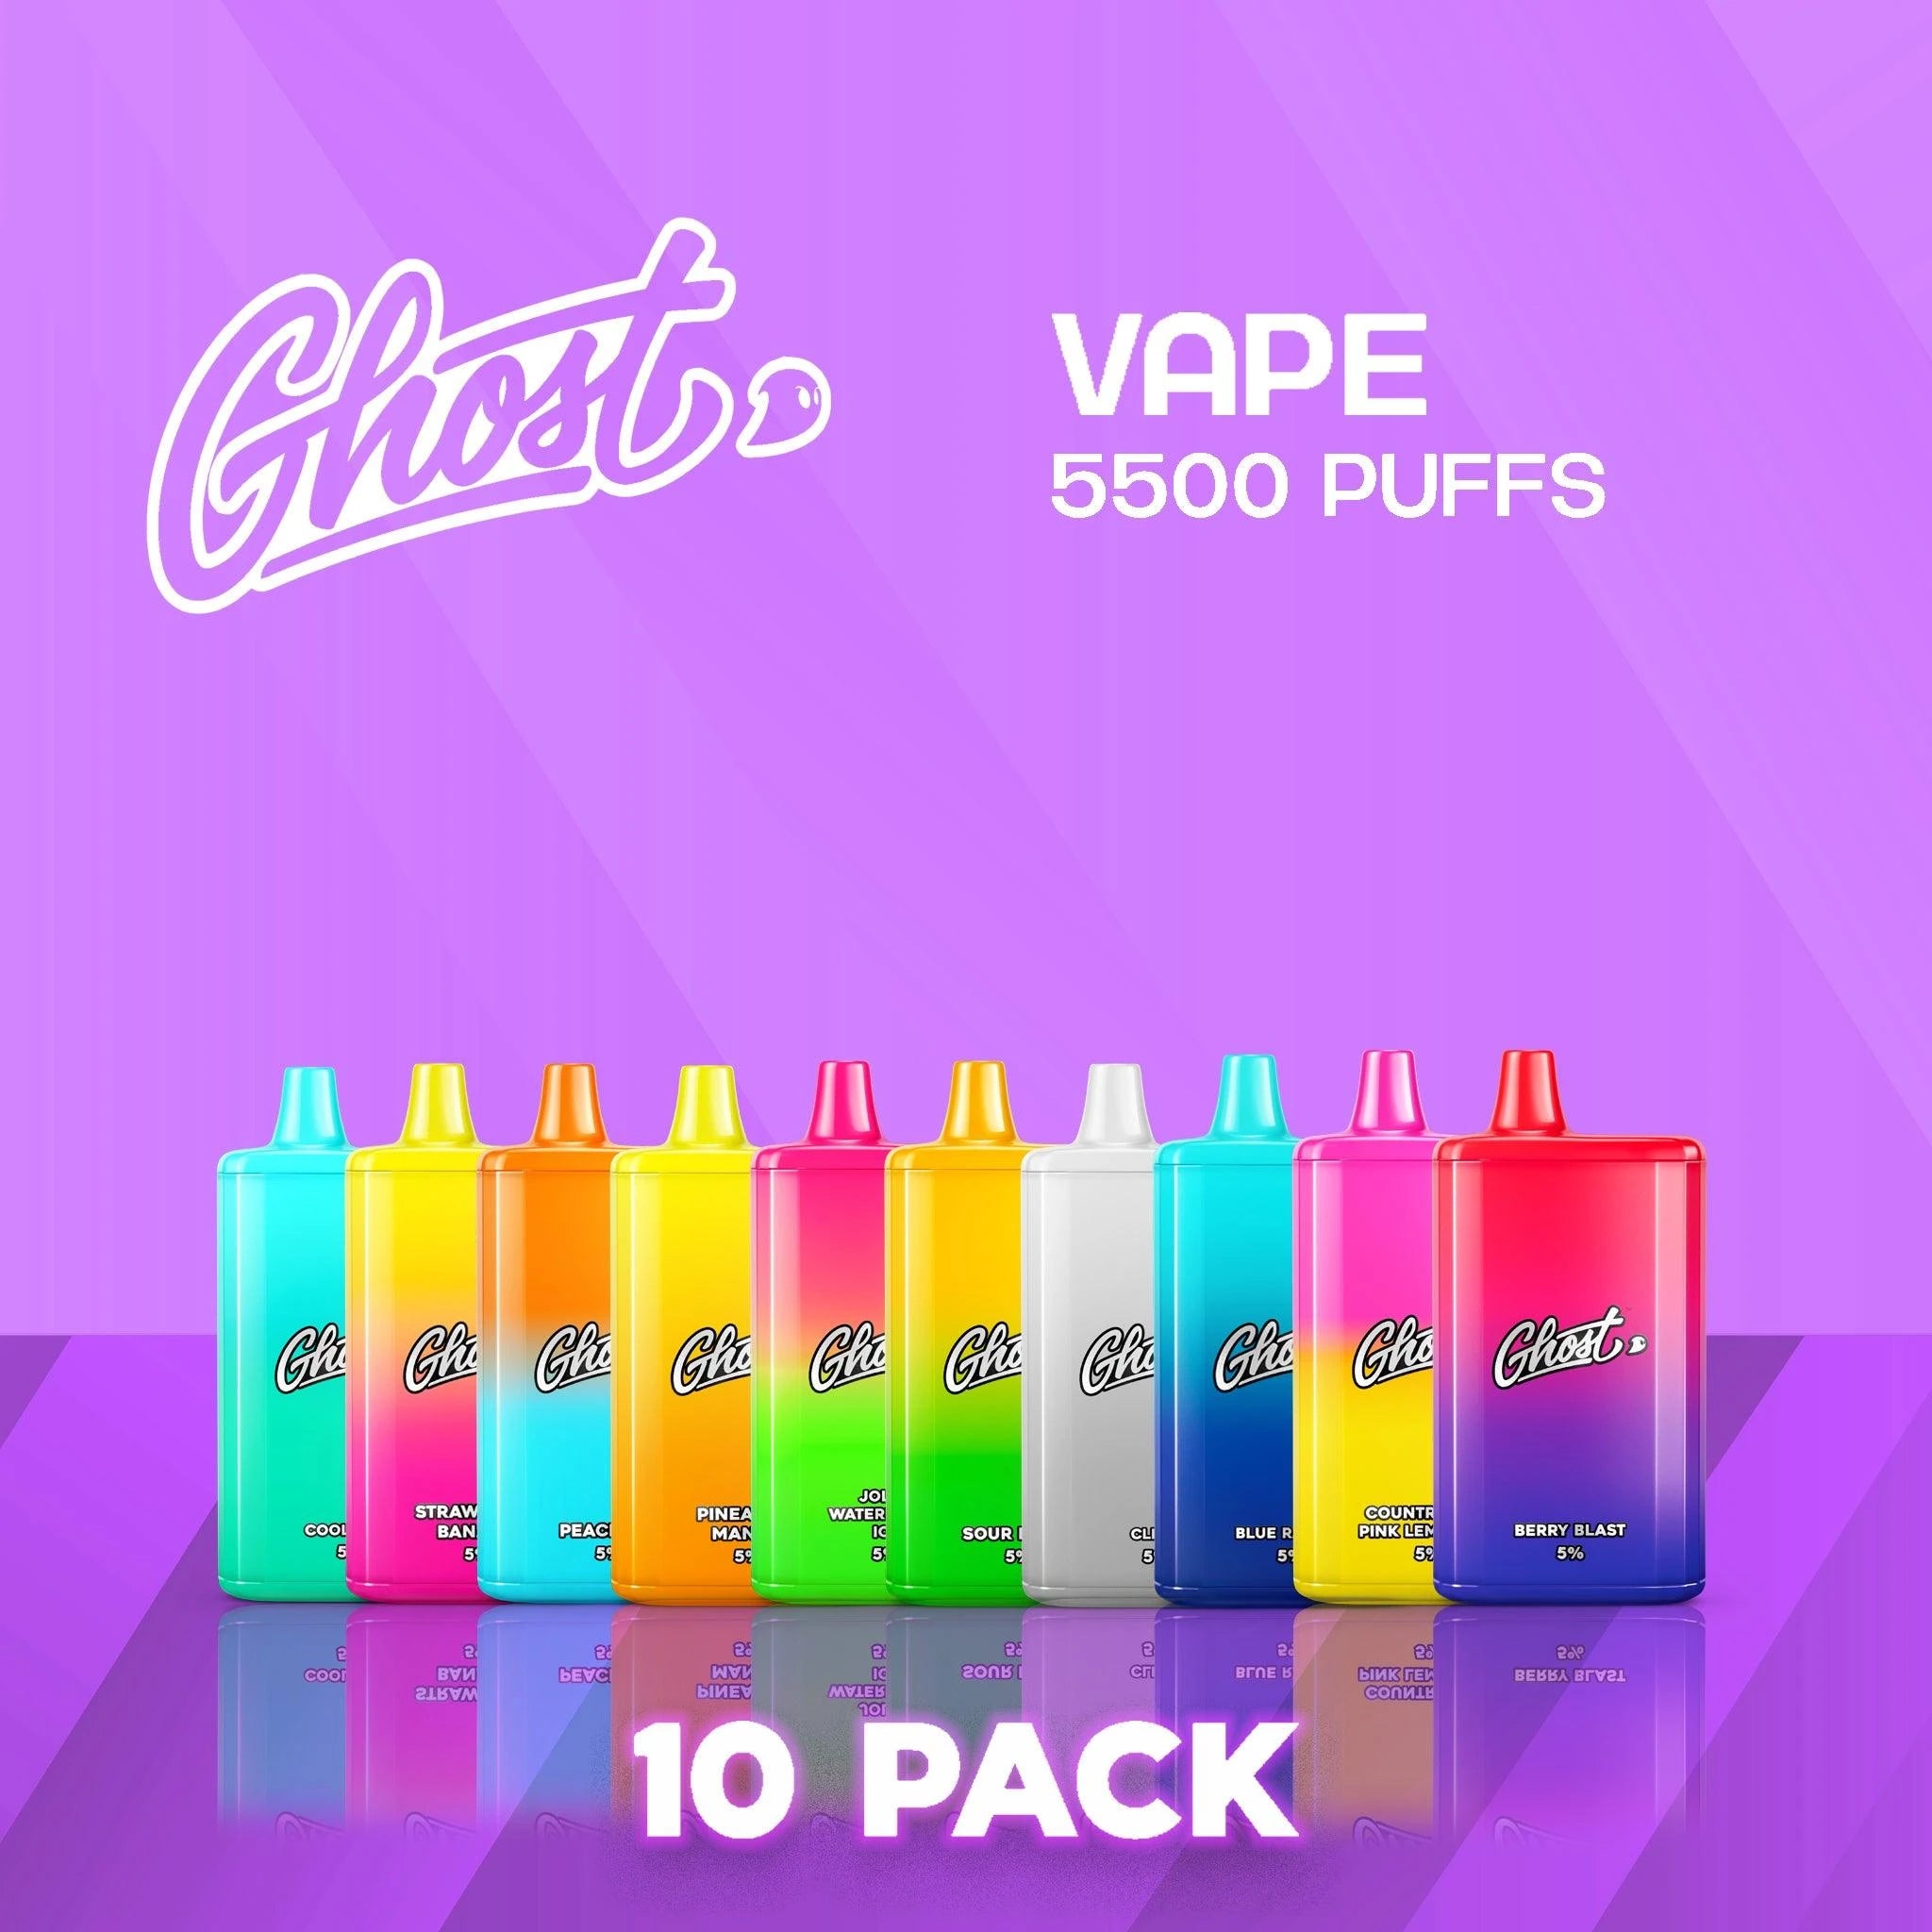 Ghost 5500 Puffs Disposable Vape - 10 Pack